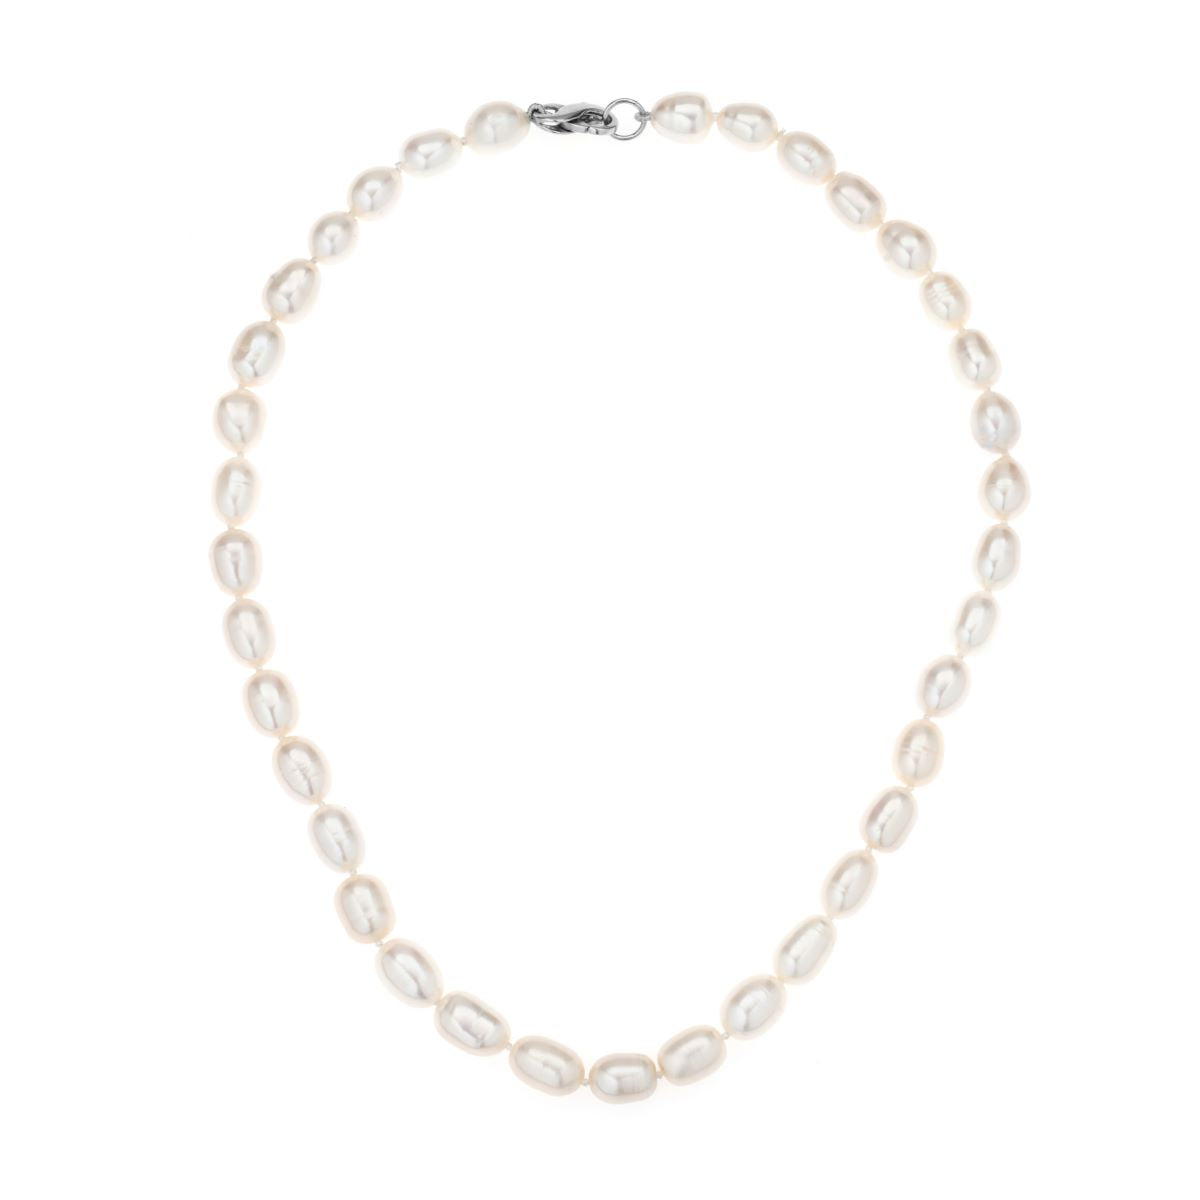 XL Seed Pearl Necklace in Sterling Silver